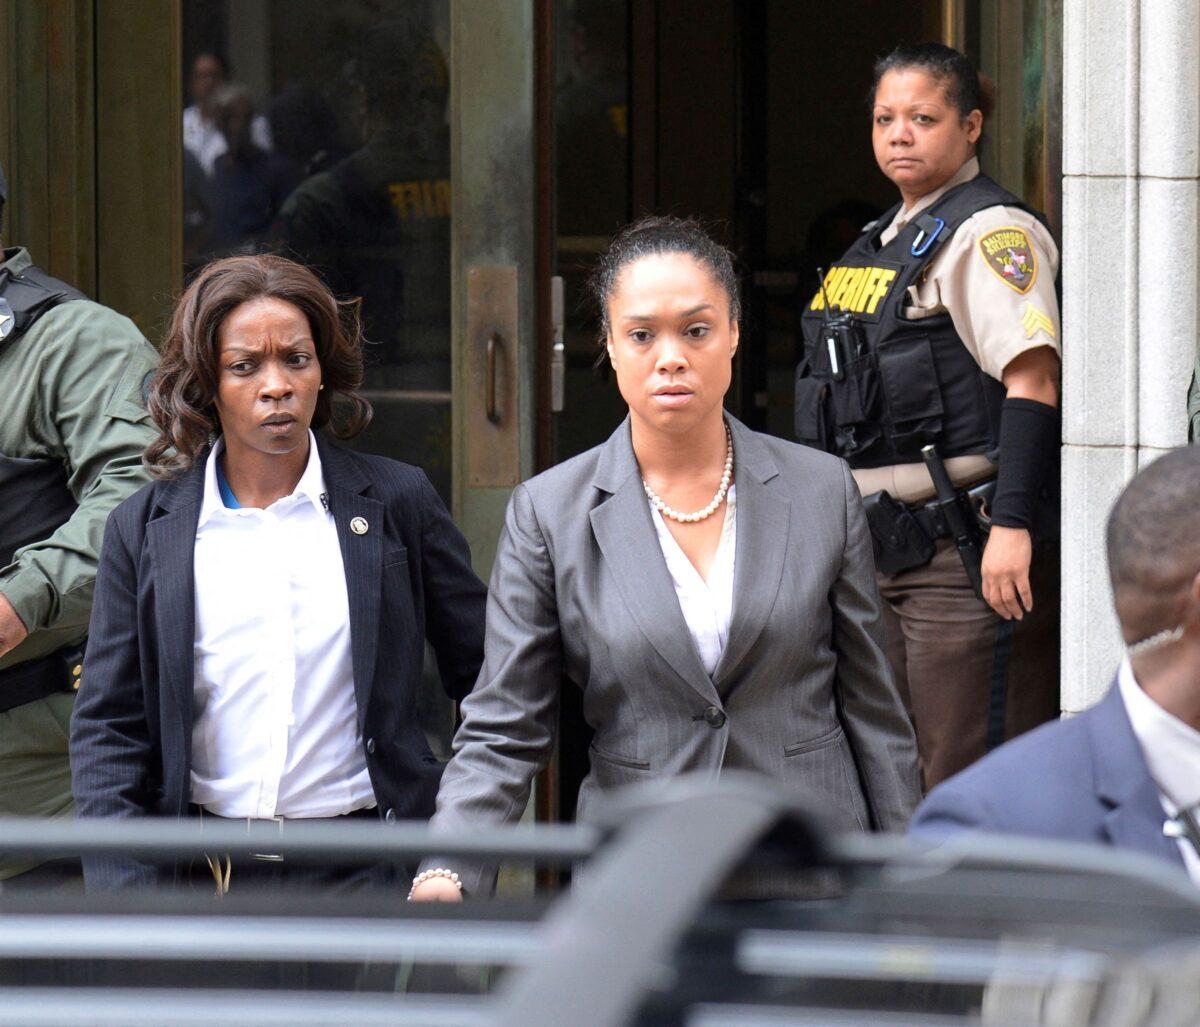 City state's attorney Marilyn Mosby (C) departs the courthouse in Baltimore on June 23, 2016. (Bryan Woolston/Reuters)